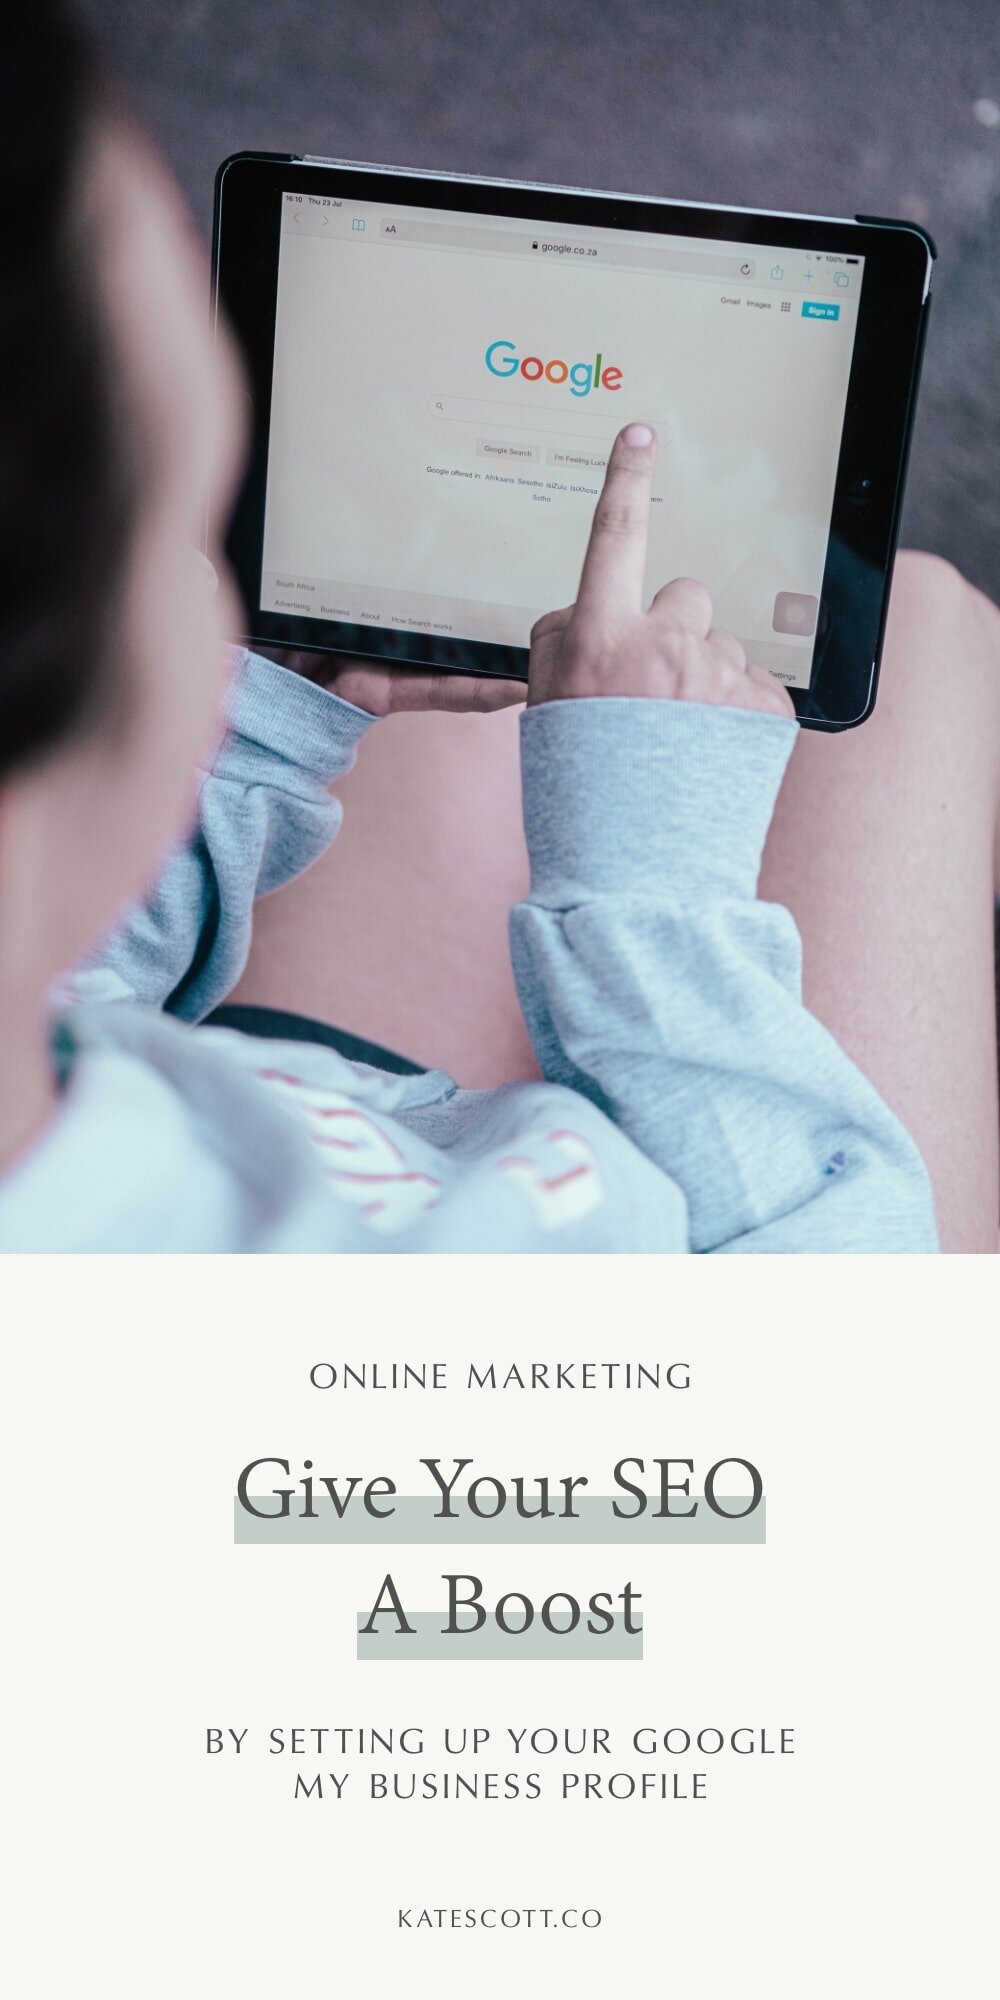 Ready to take your SEO game to the next level? Signing up for a Google My Business listing can dramatically boost the amount of targeted search traffic you receive! In this guide, I’ll show you exactly how to set up. your listing for maximum impact.…